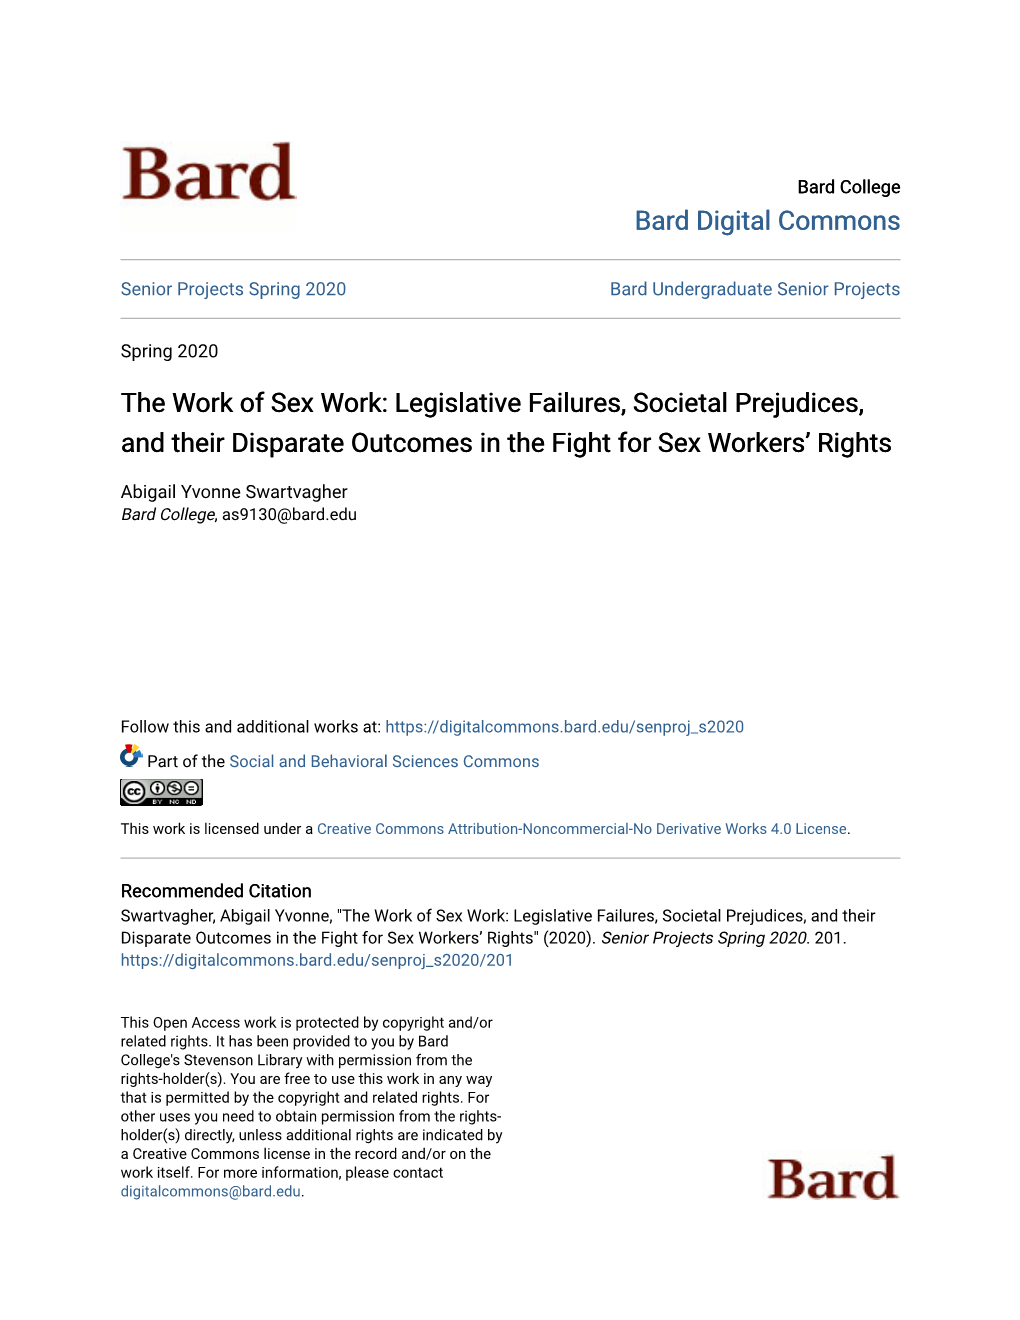 The Work of Sex Work: Legislative Failures, Societal Prejudices, and Their Disparate Outcomes in the Fight for Sex Workers’ Rights